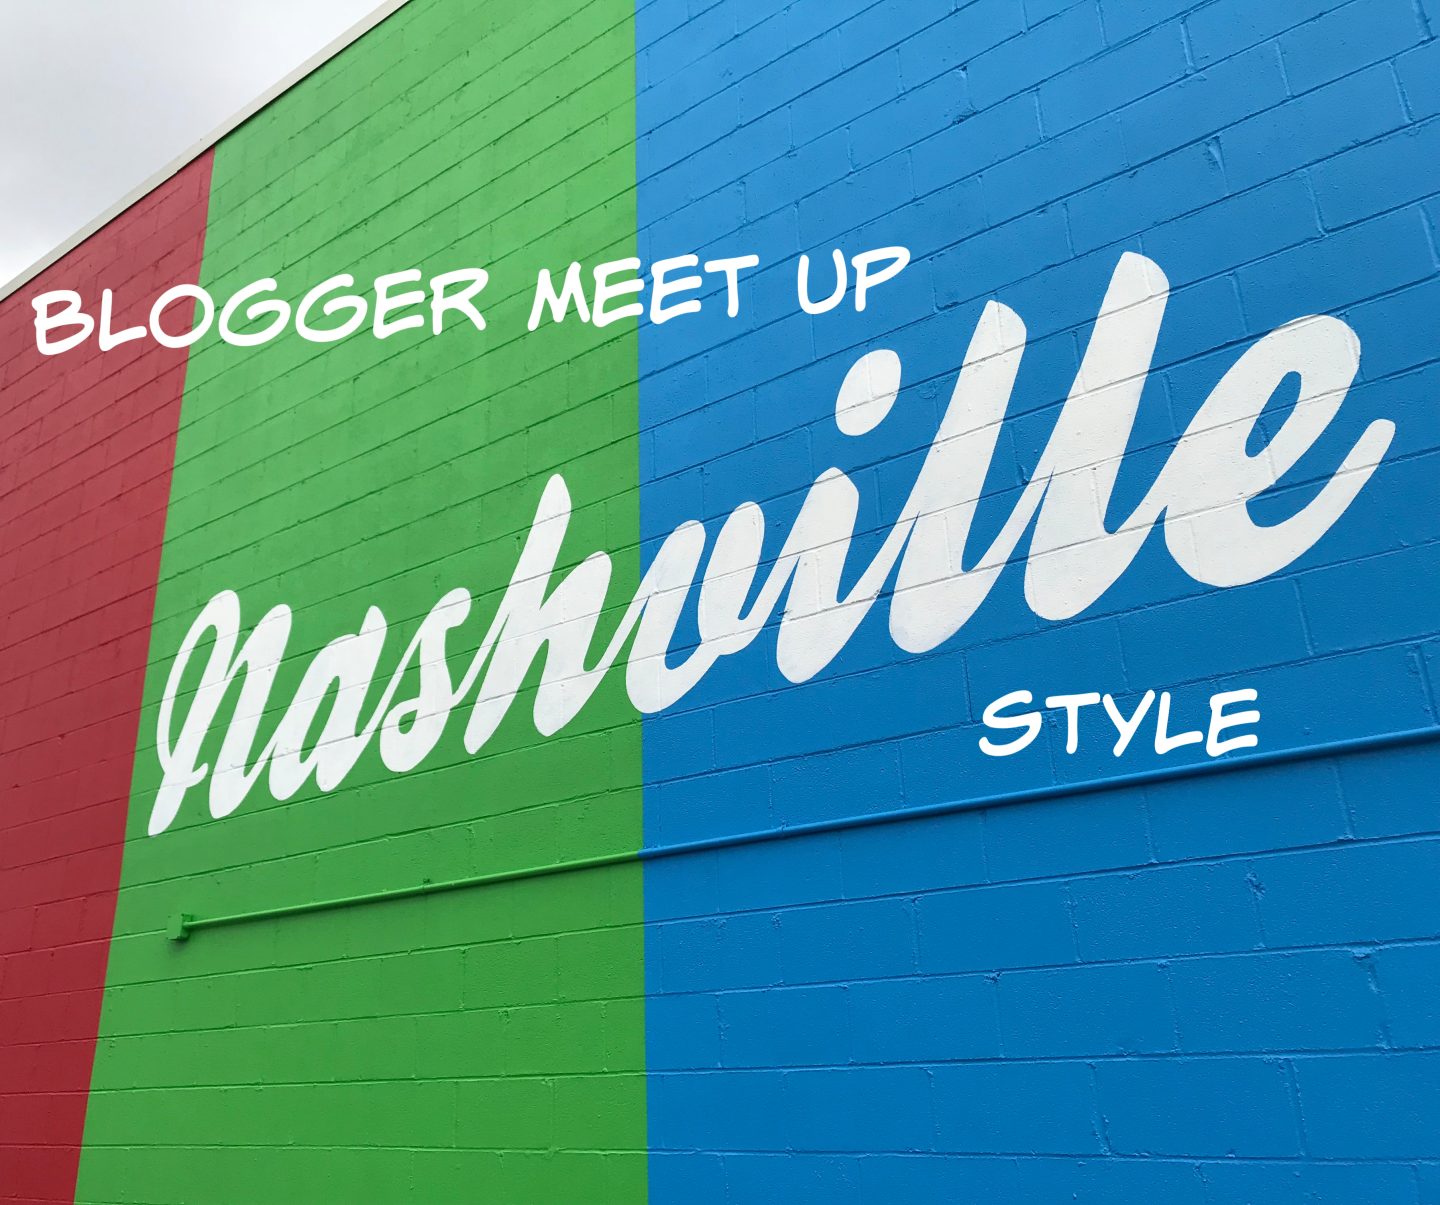 When Bloggers and Nashville Collide